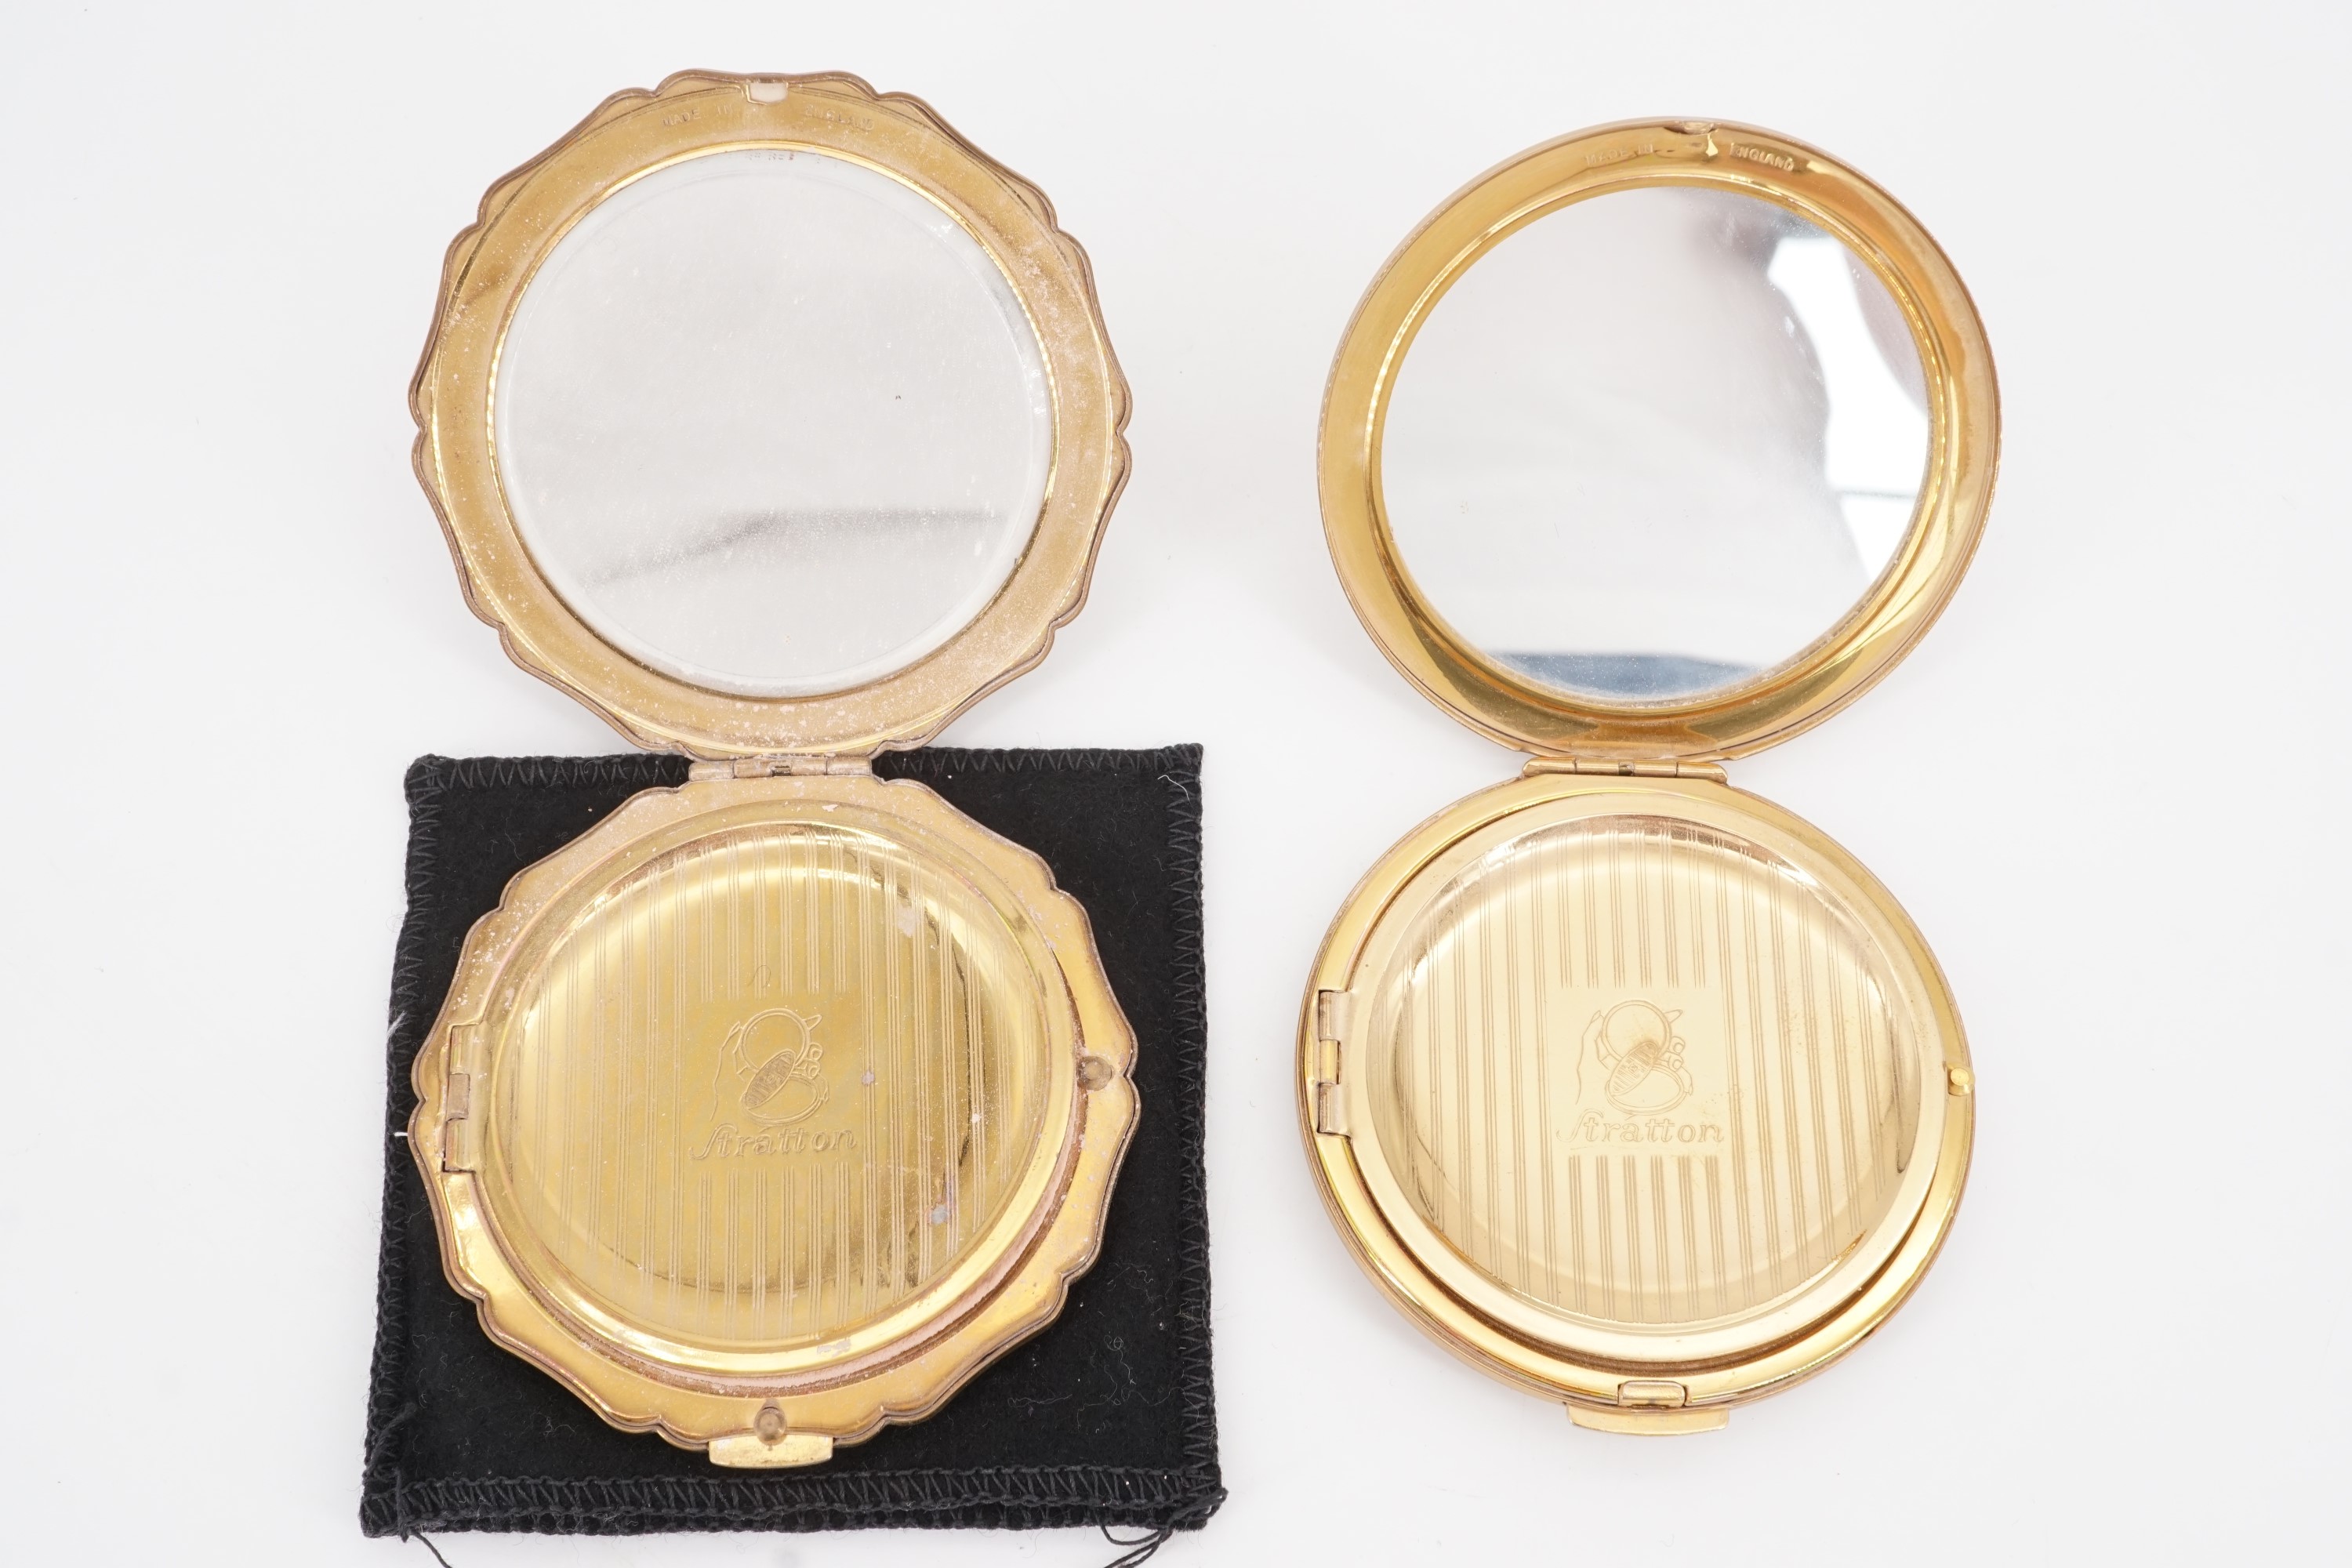 Two vintage Stratton powder compacts - Image 2 of 3